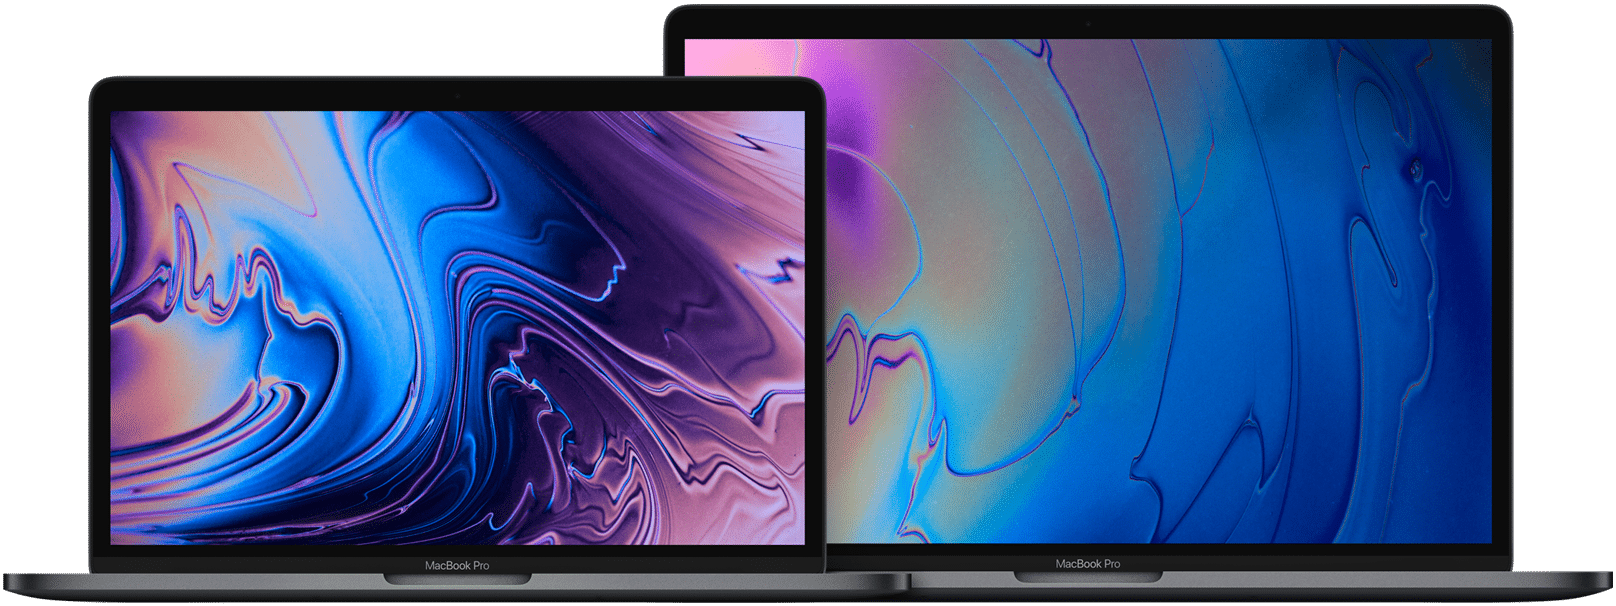 New 13 ″ MacBook Pro may have 10th generation Intel chips and up to 32GB of RAM